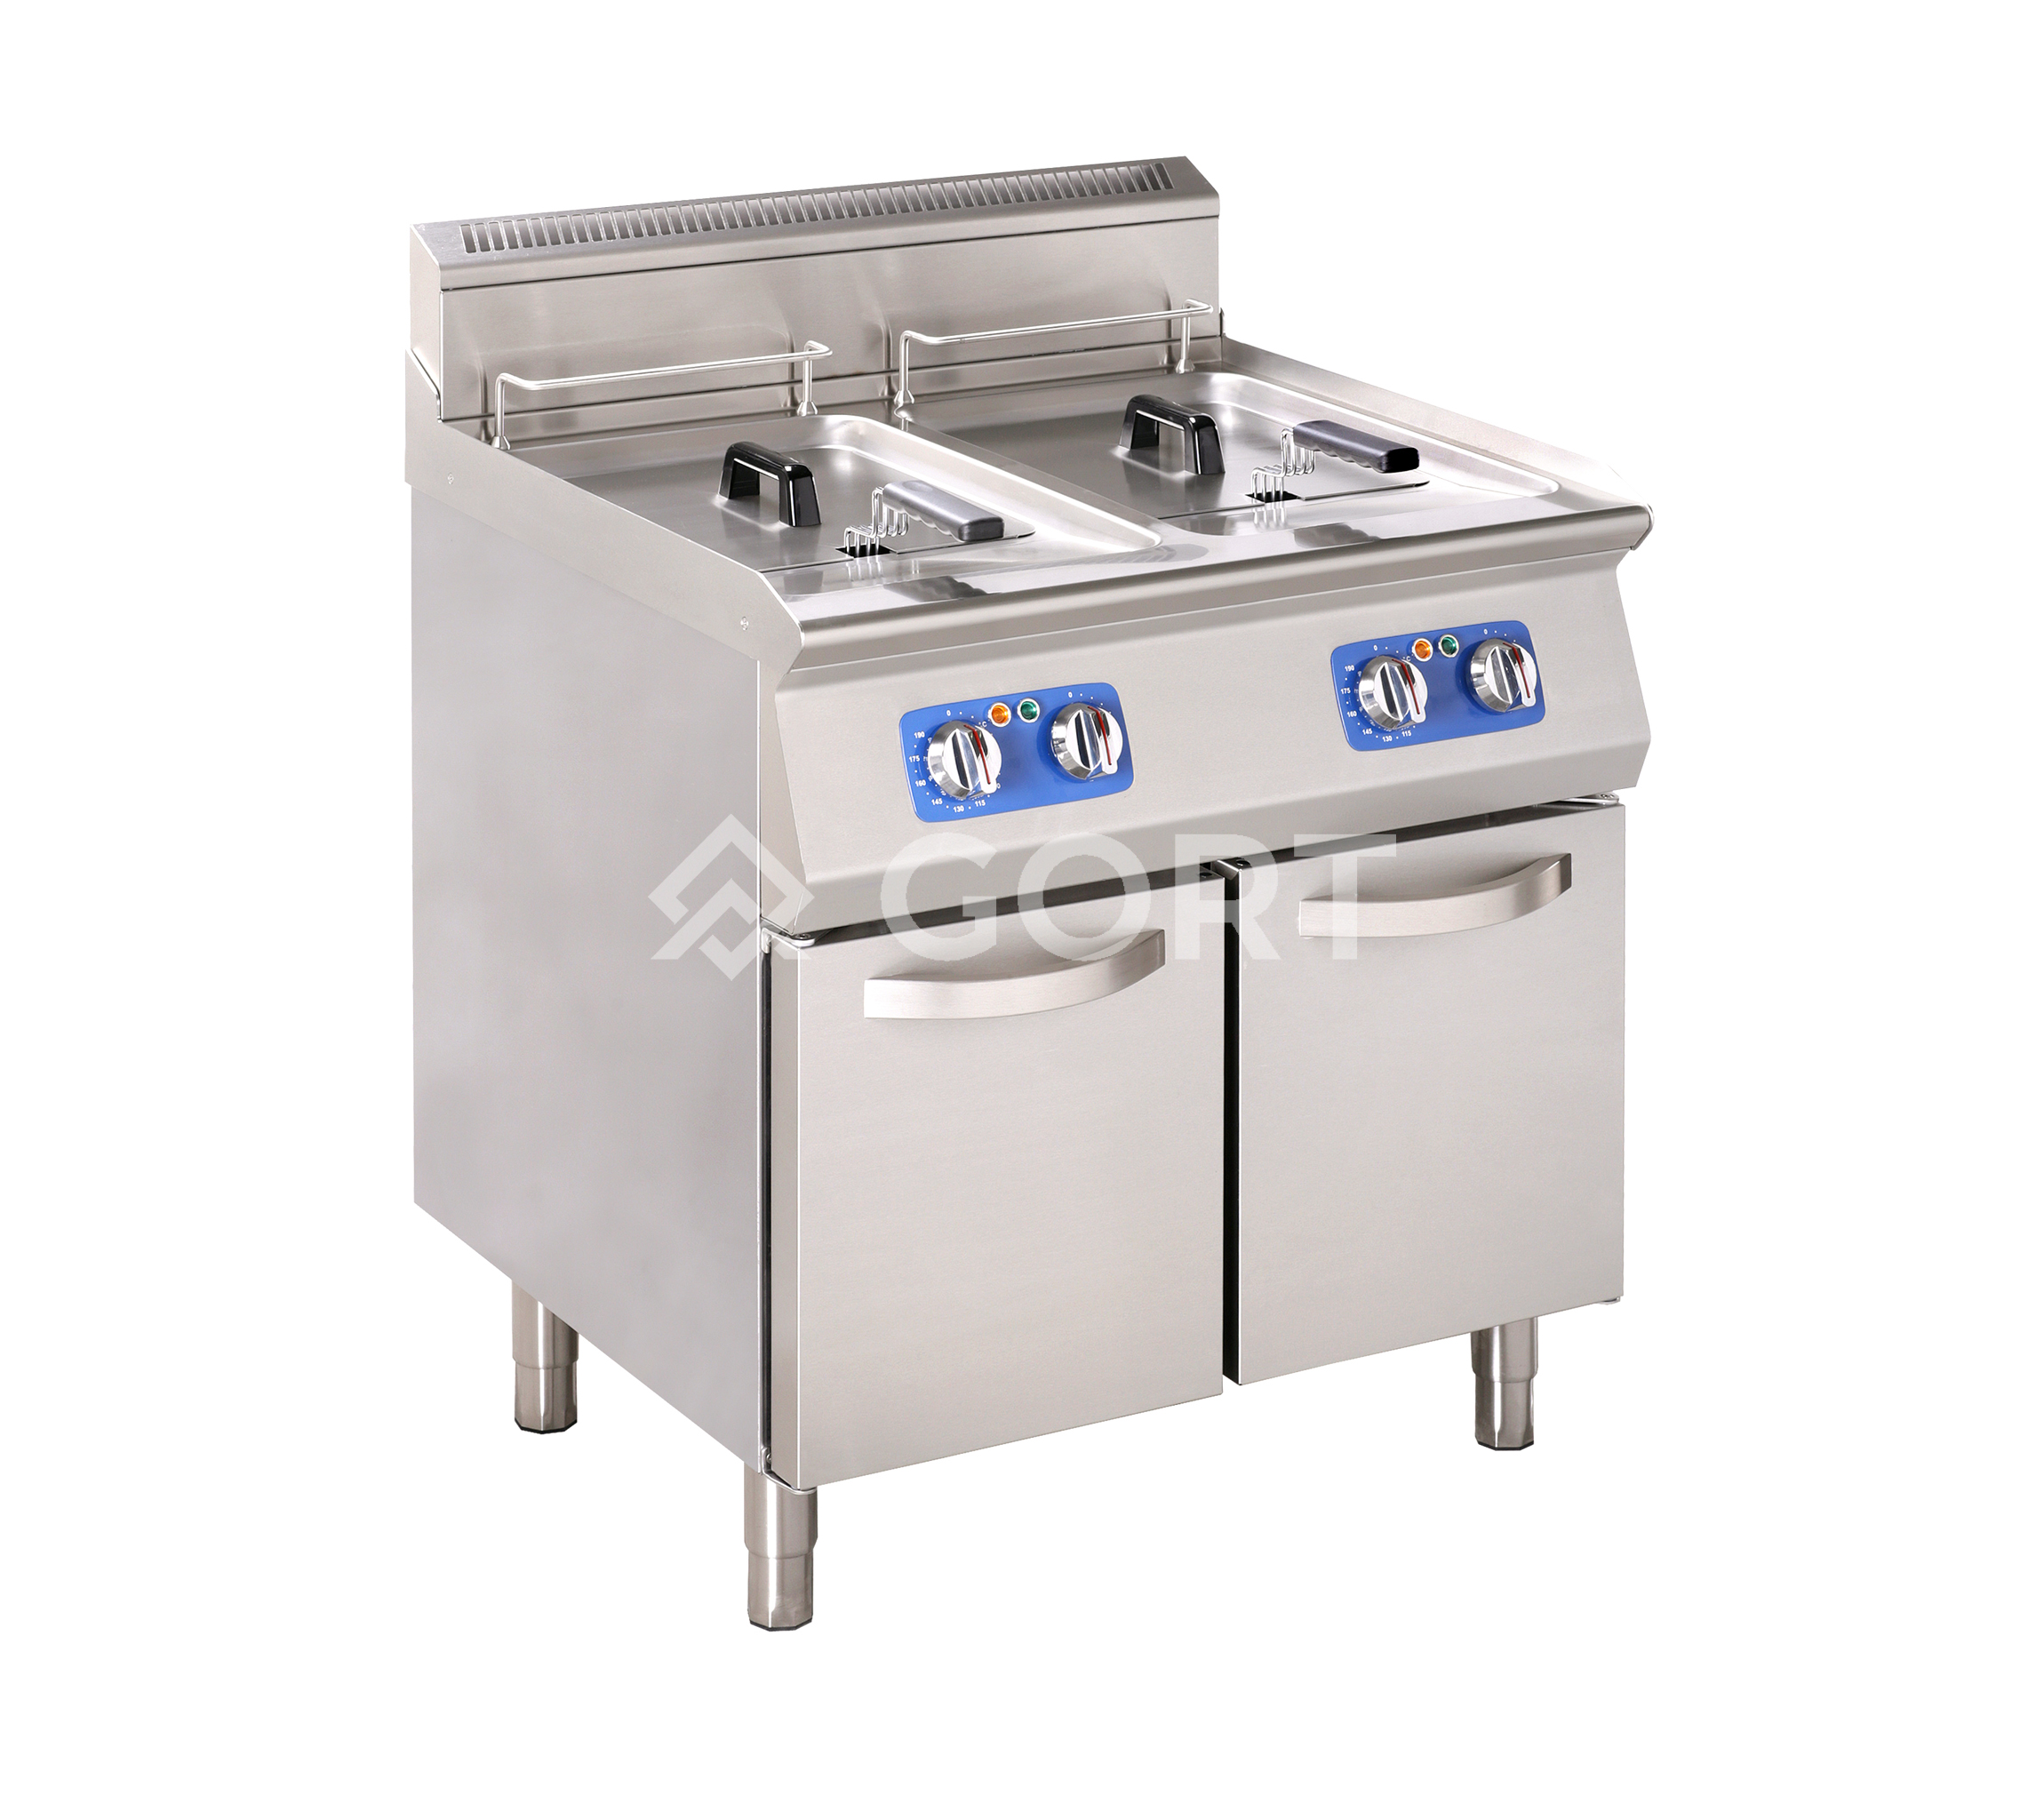 Double tank electric fryer with cold zone